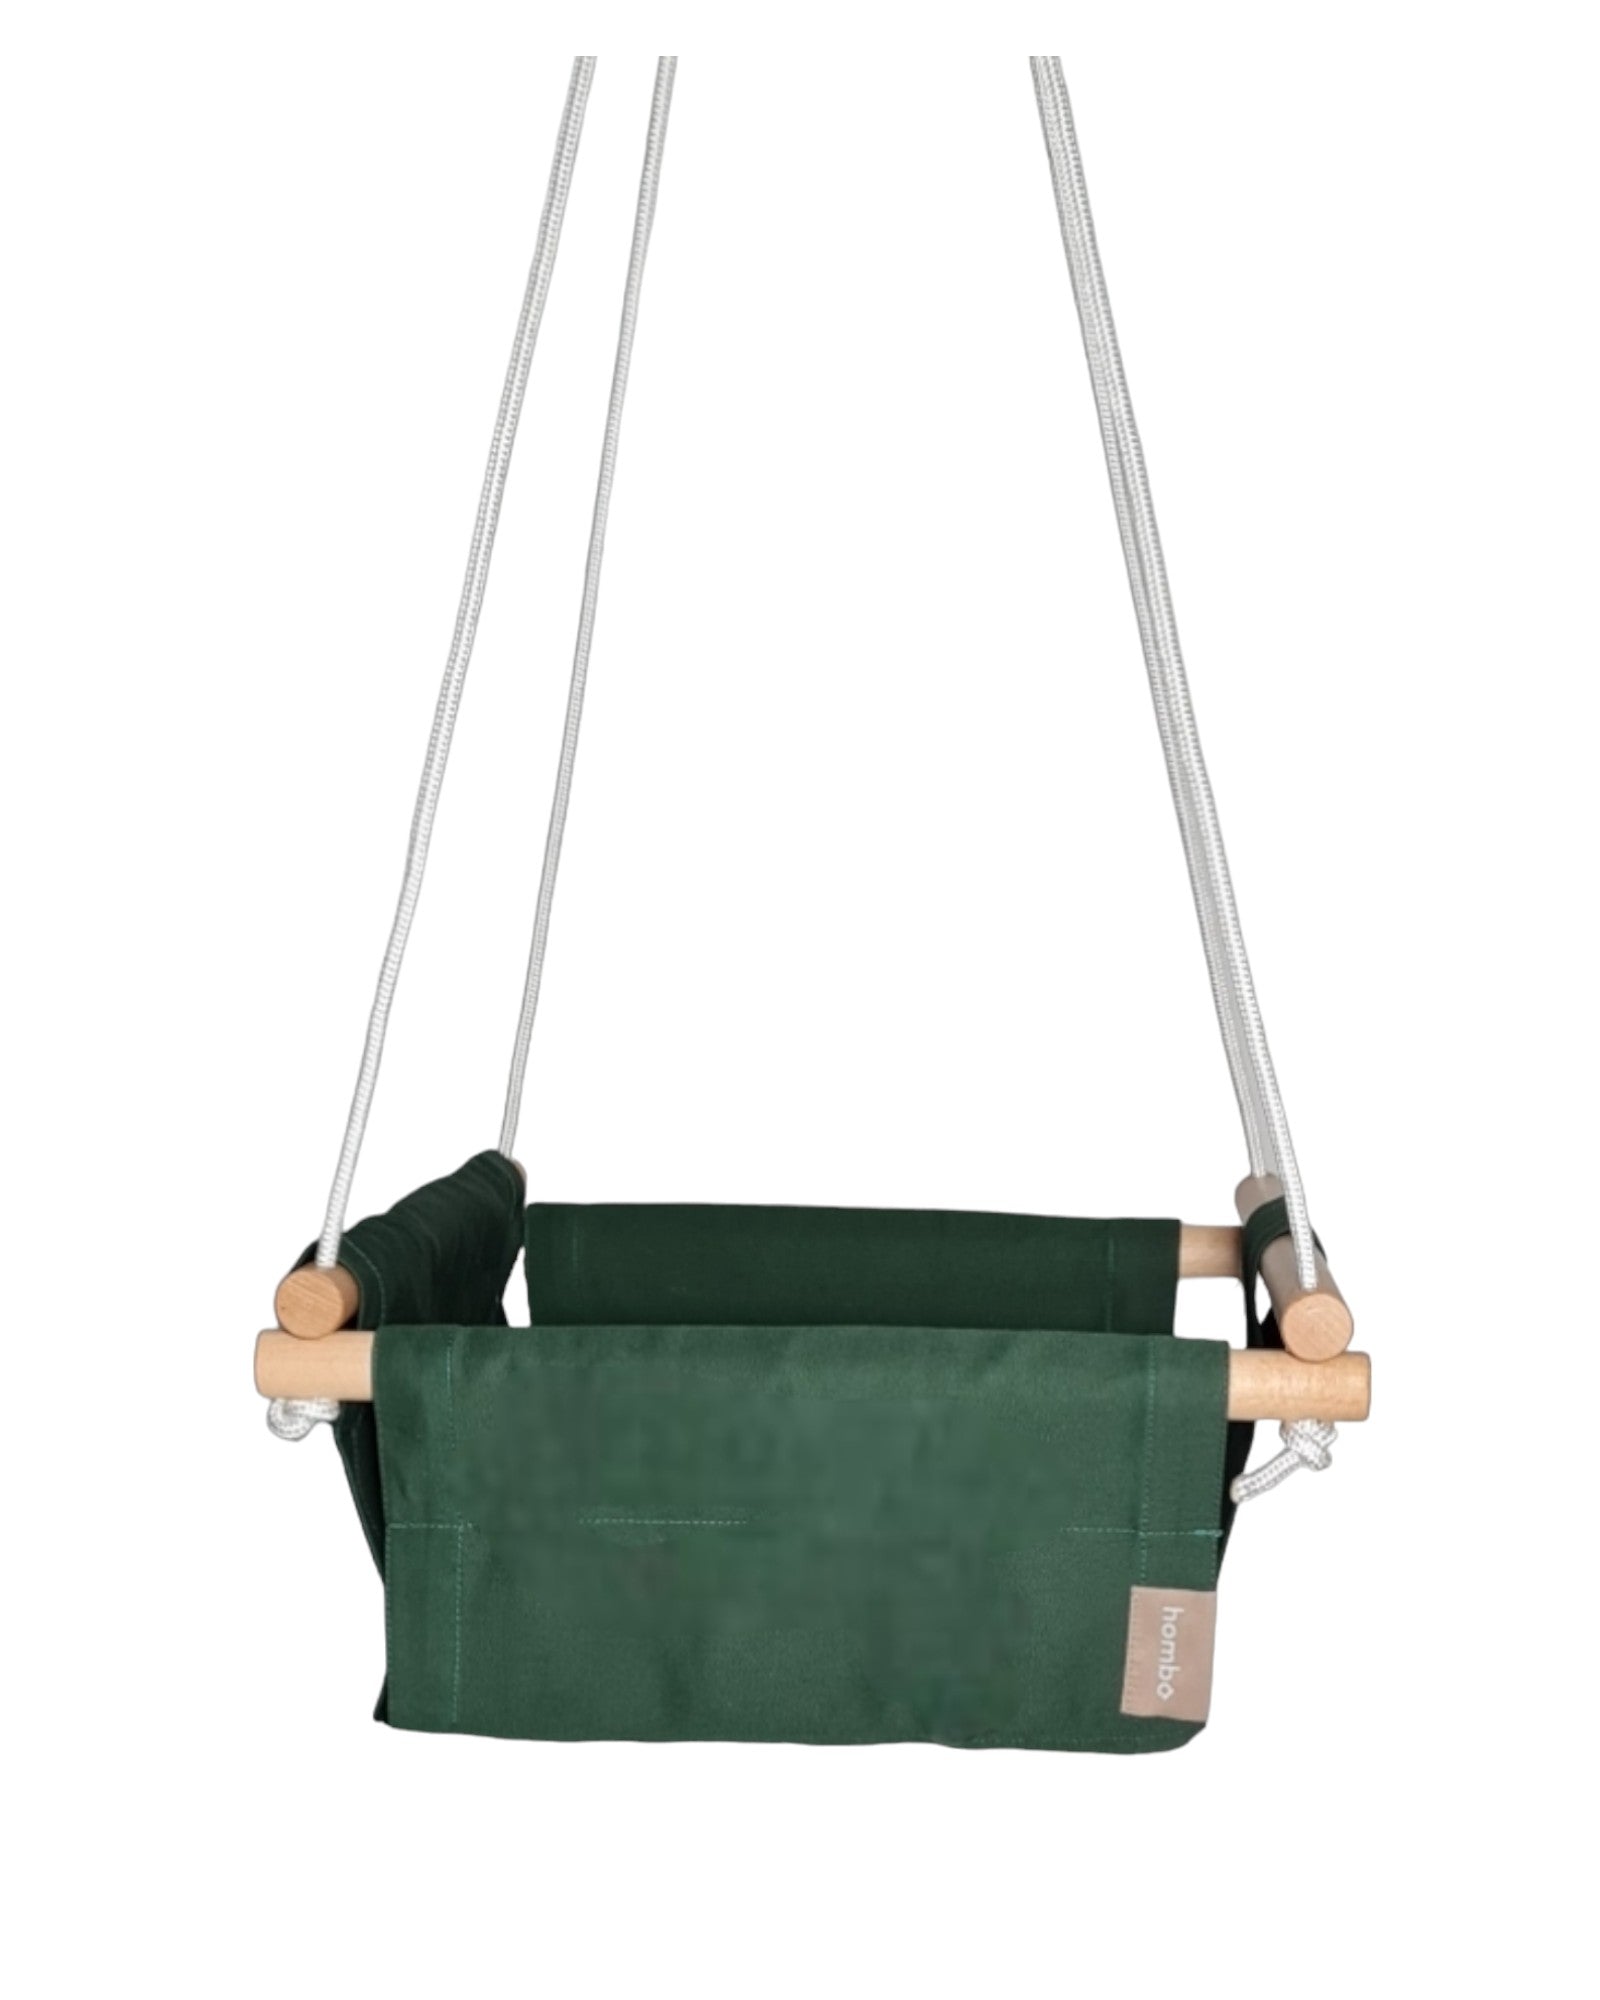 homba® kids cotton swing green (from 6 months)